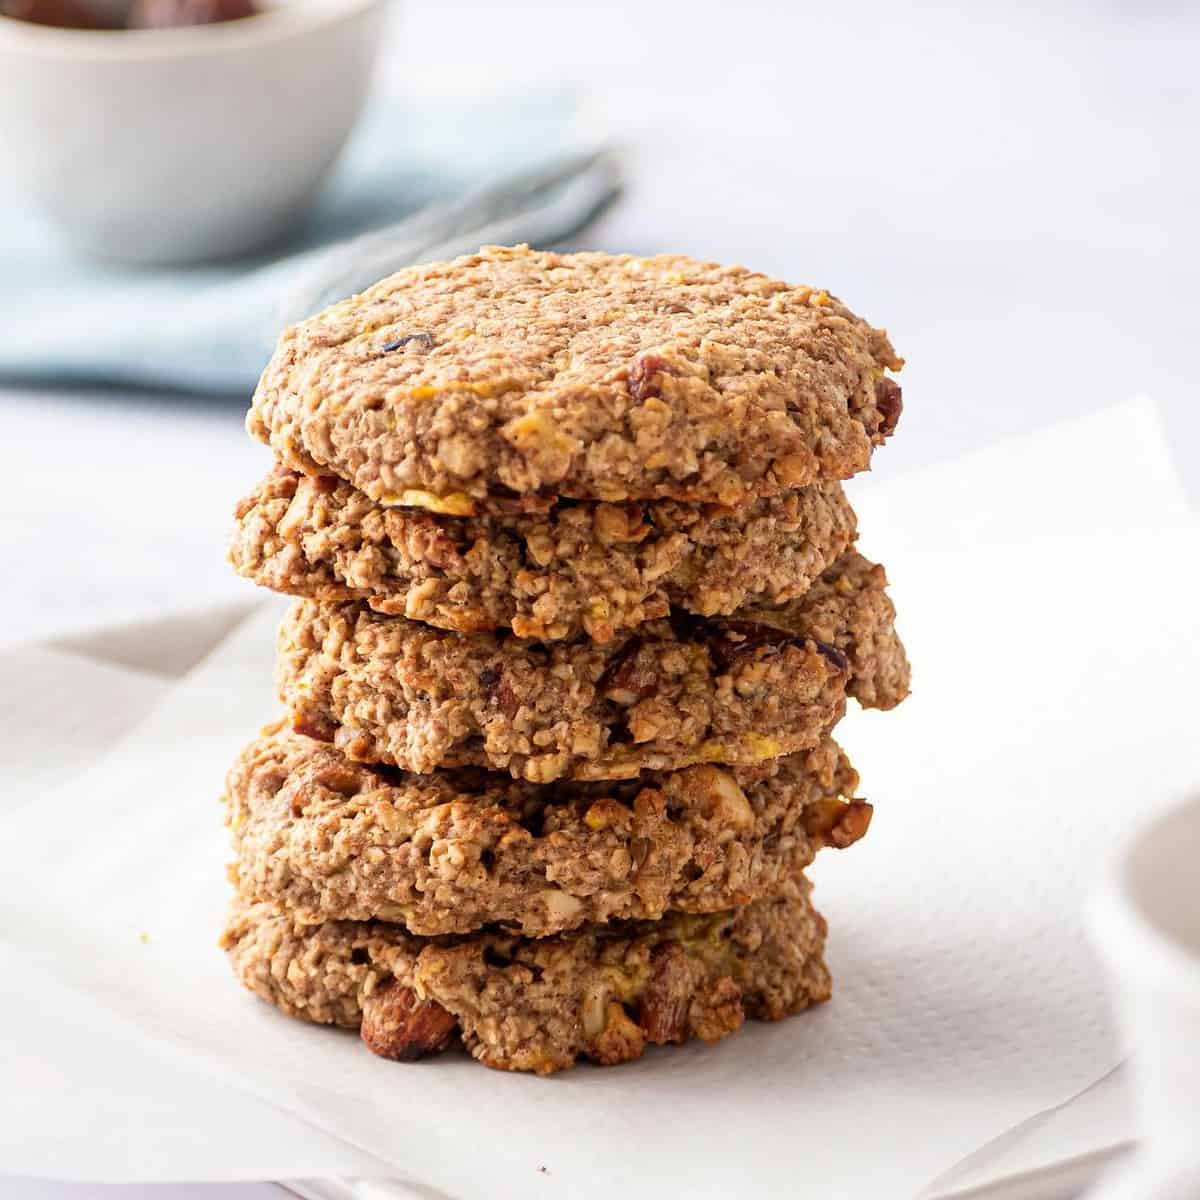  Never compromise on taste or nutrition with these oatmeal cookies.